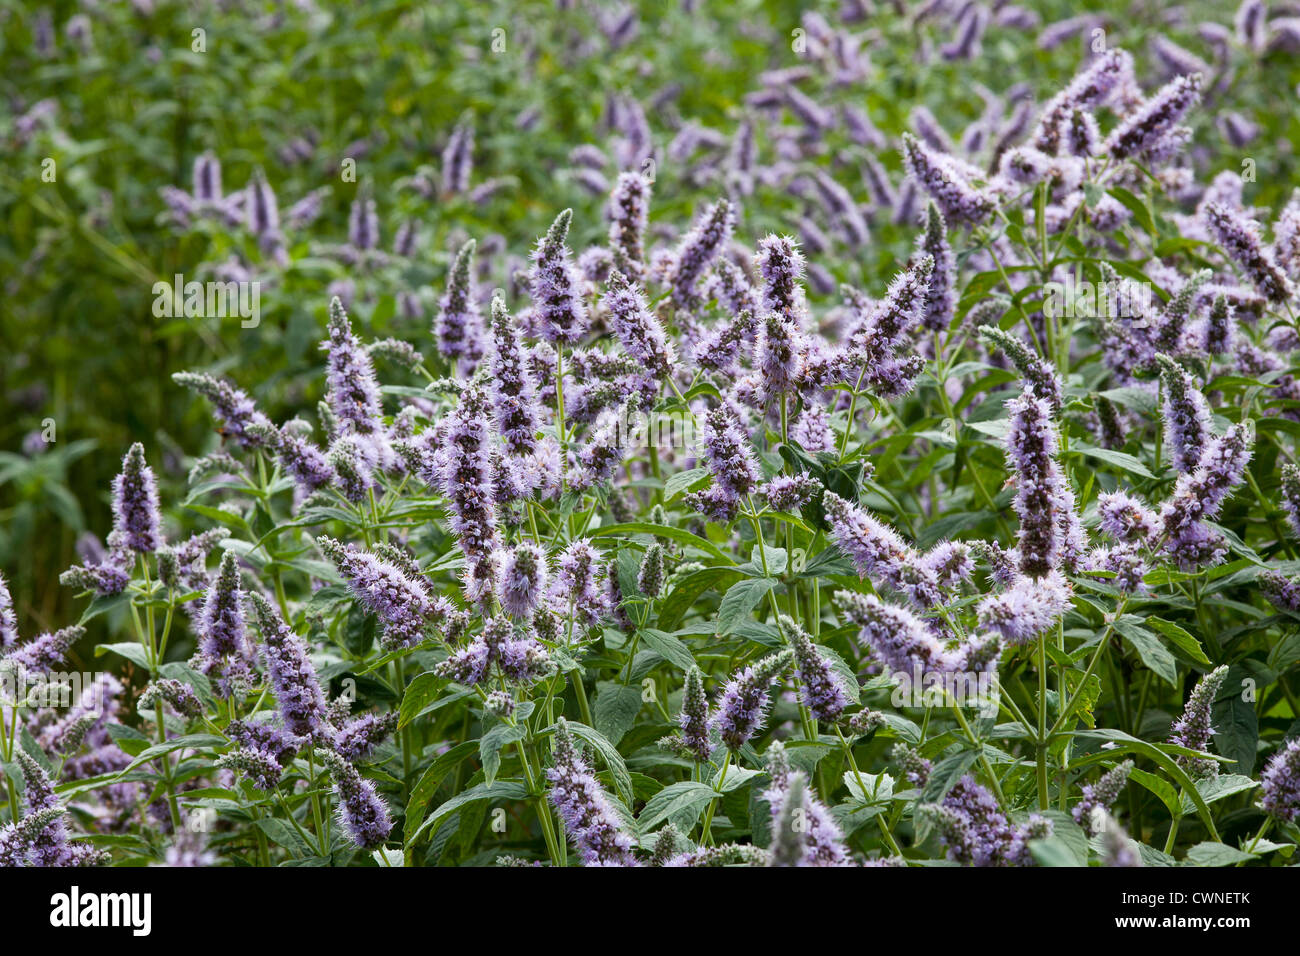 field of blossom mint with green leaves and violet flowers Stock Photo